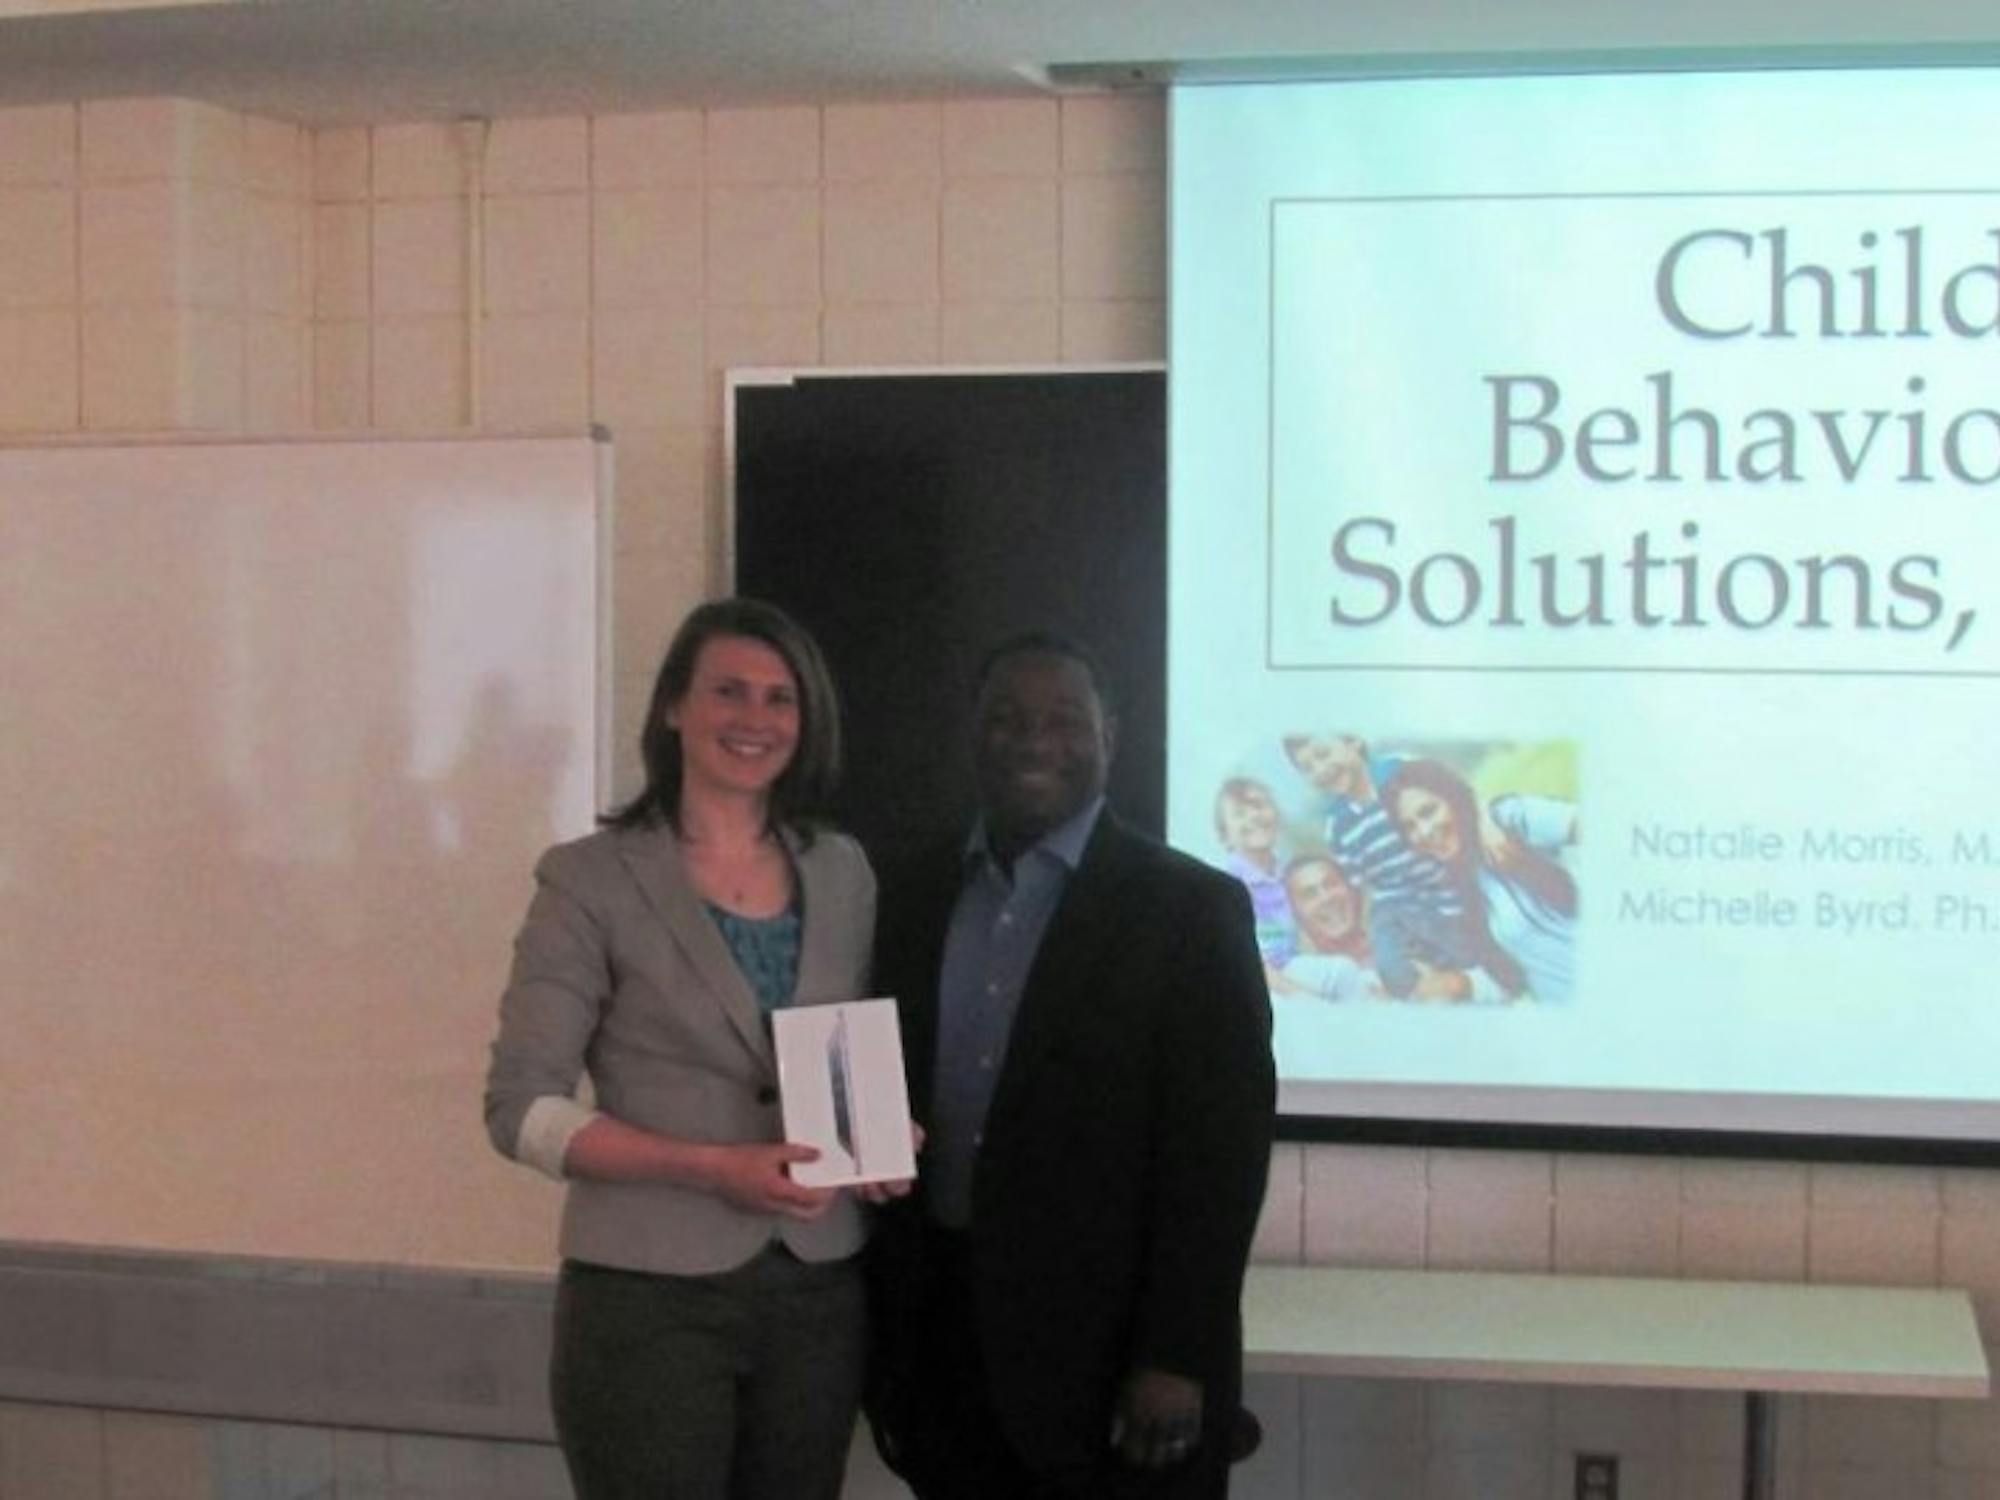 	Natalie Morris, a doctoral student in clinical psychology, won $500 for placing first with her Child Behaviorial Solutions program idea.